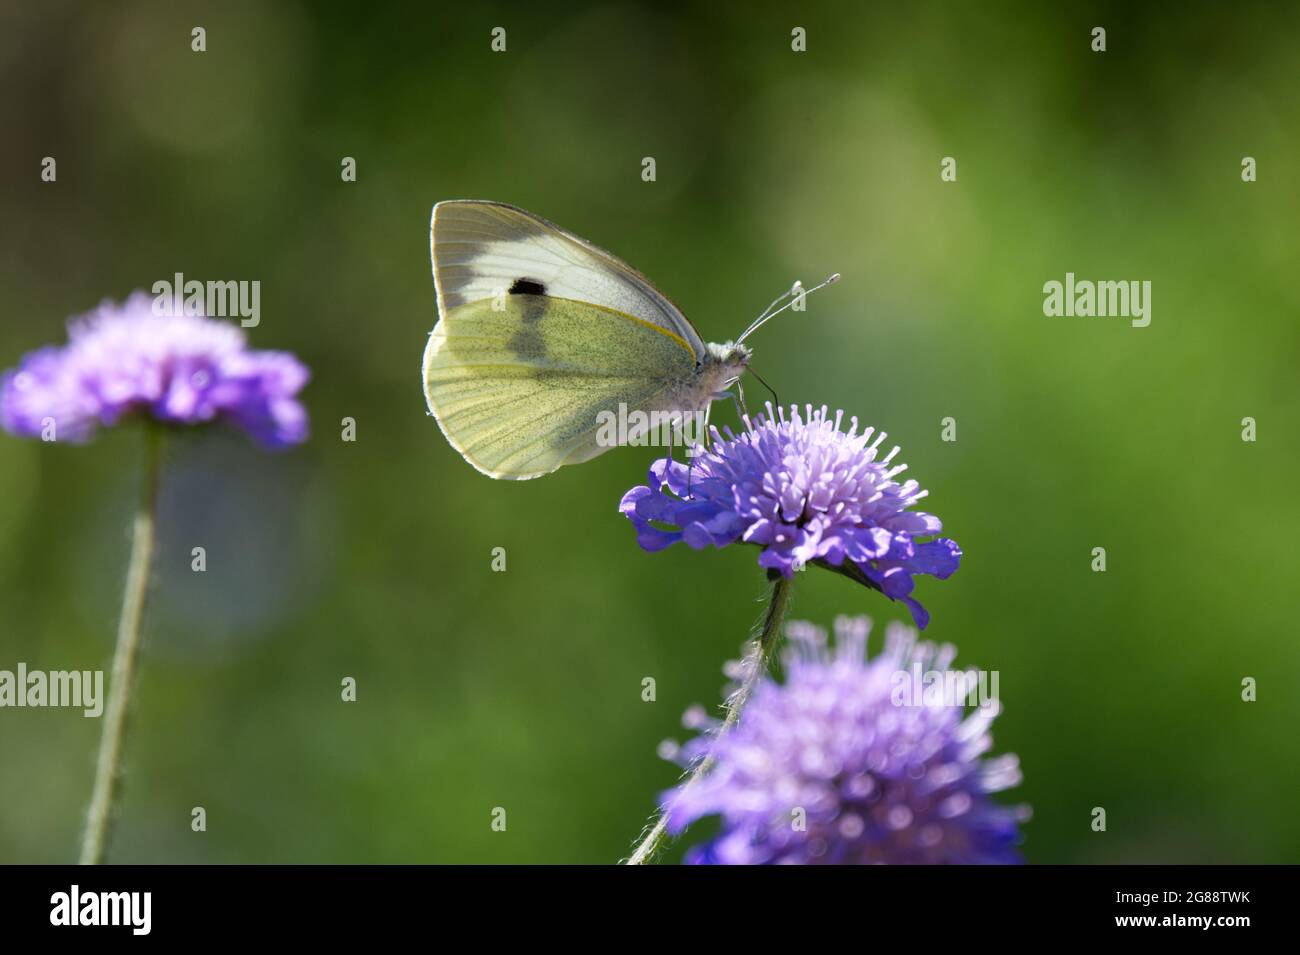 Summer flower of Field scabious ( Knautia arvensis) with cabbage white butterfly (Pieris rapae) July UK Stock Photo